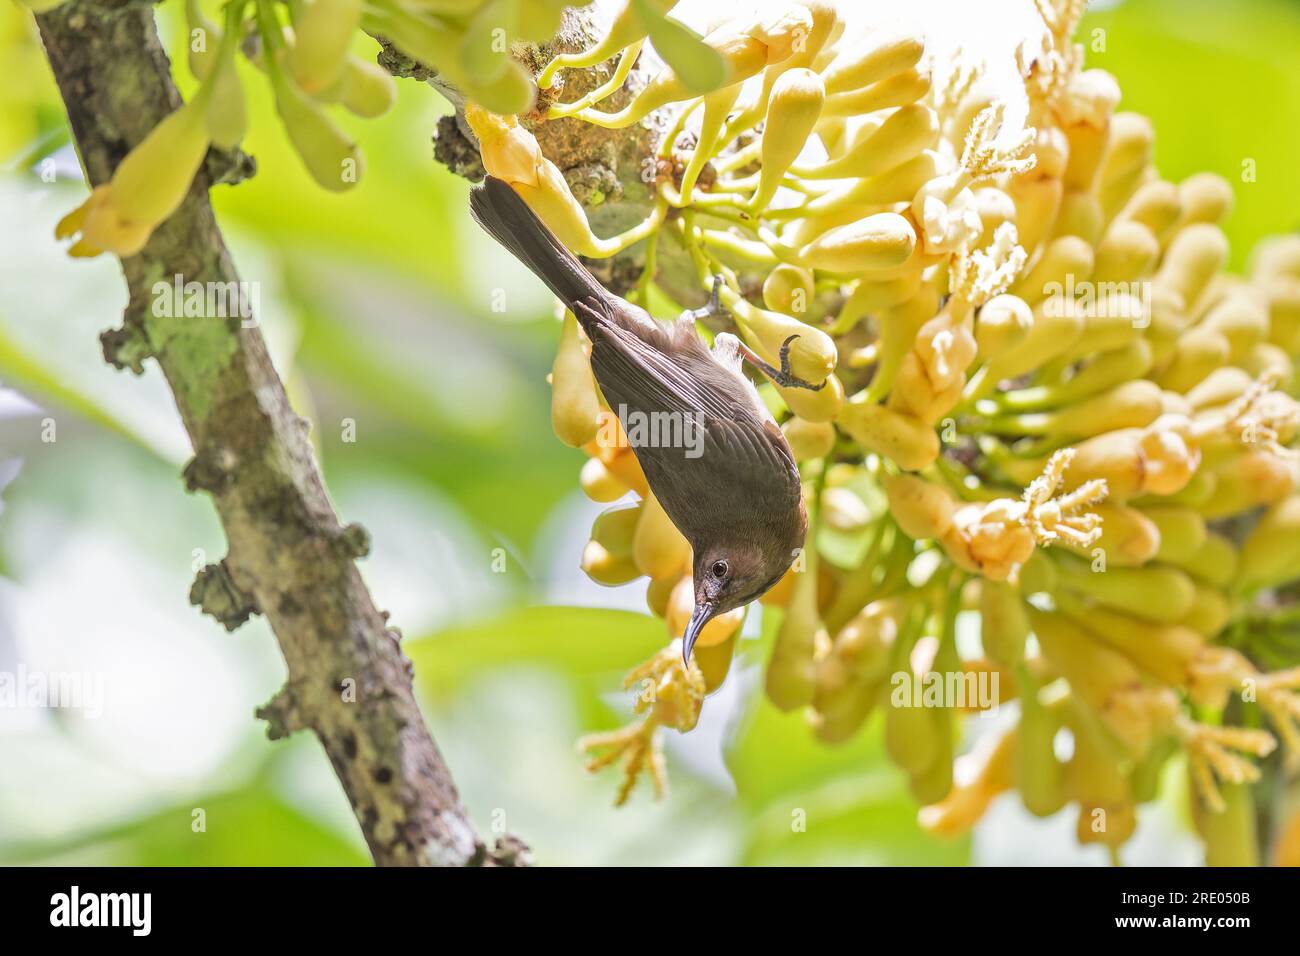 dusky honeyeater (Myzomela obscura), headlong at a yellow flower, side view, Australia, Queensland Stock Photo